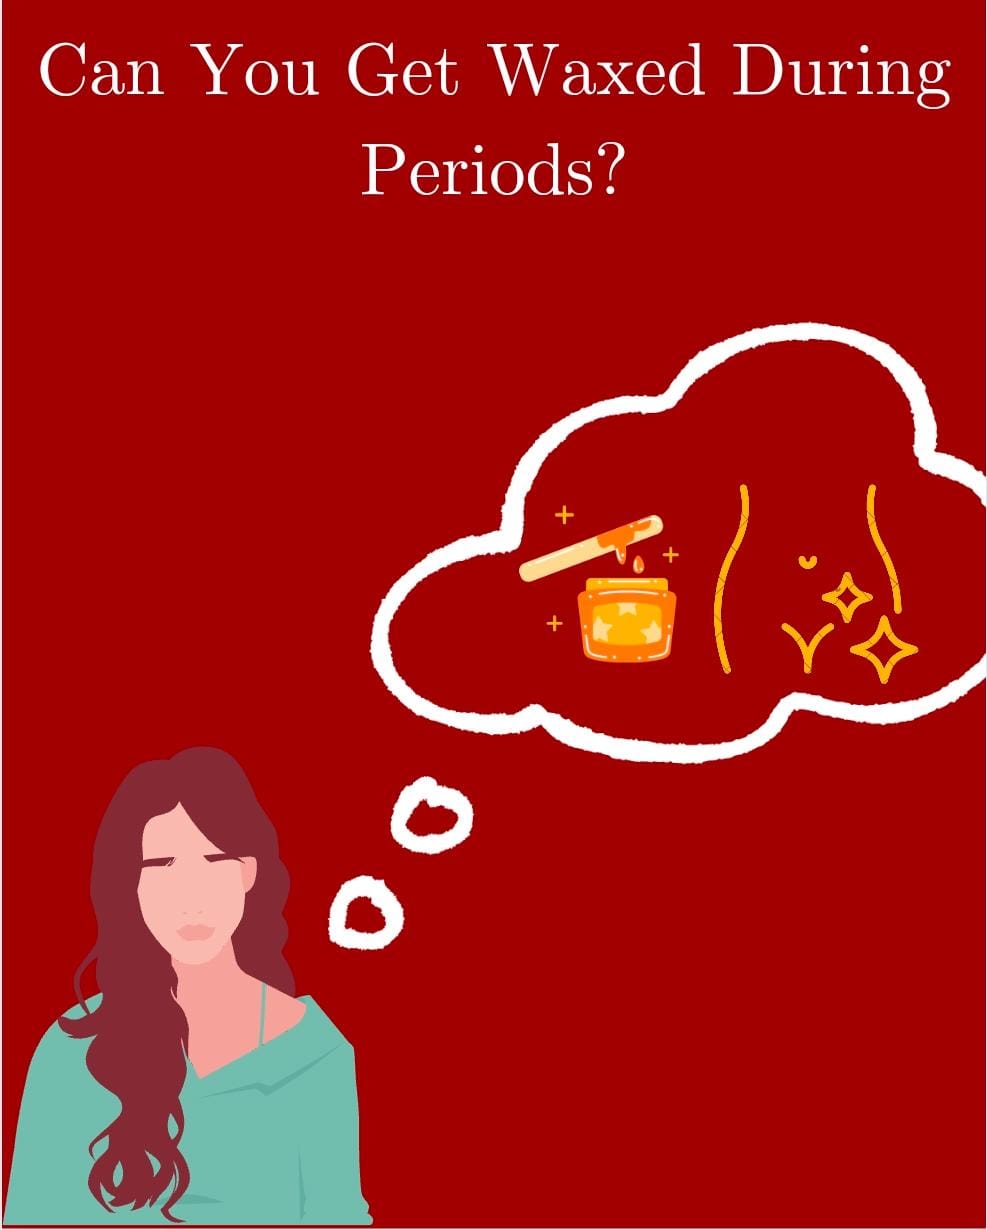 Can You Get Waxed During Periods?